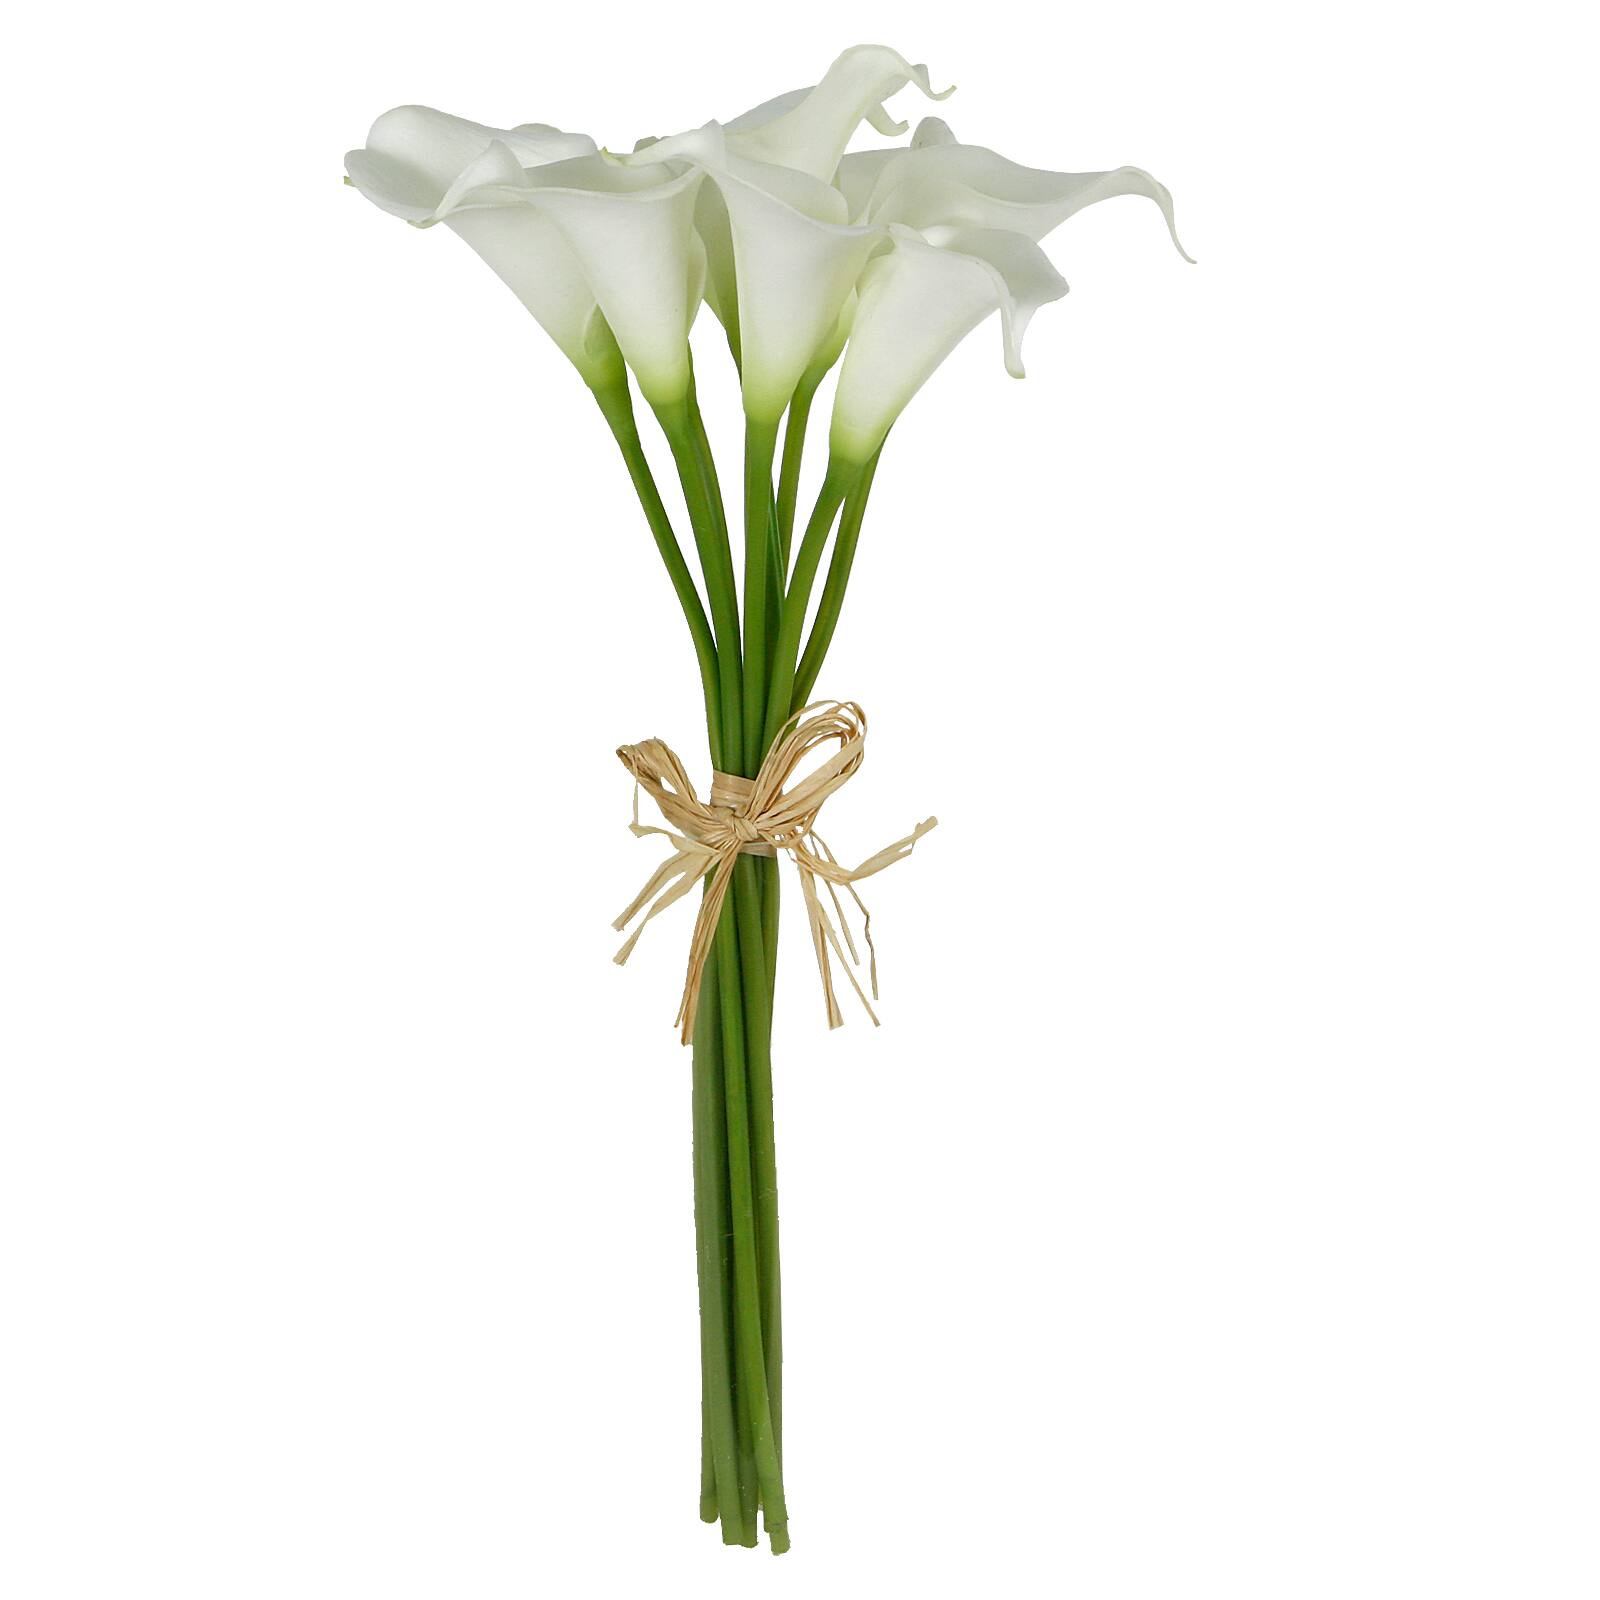 Shop For The White Calla Lily Bunch By Ashland At Michaels